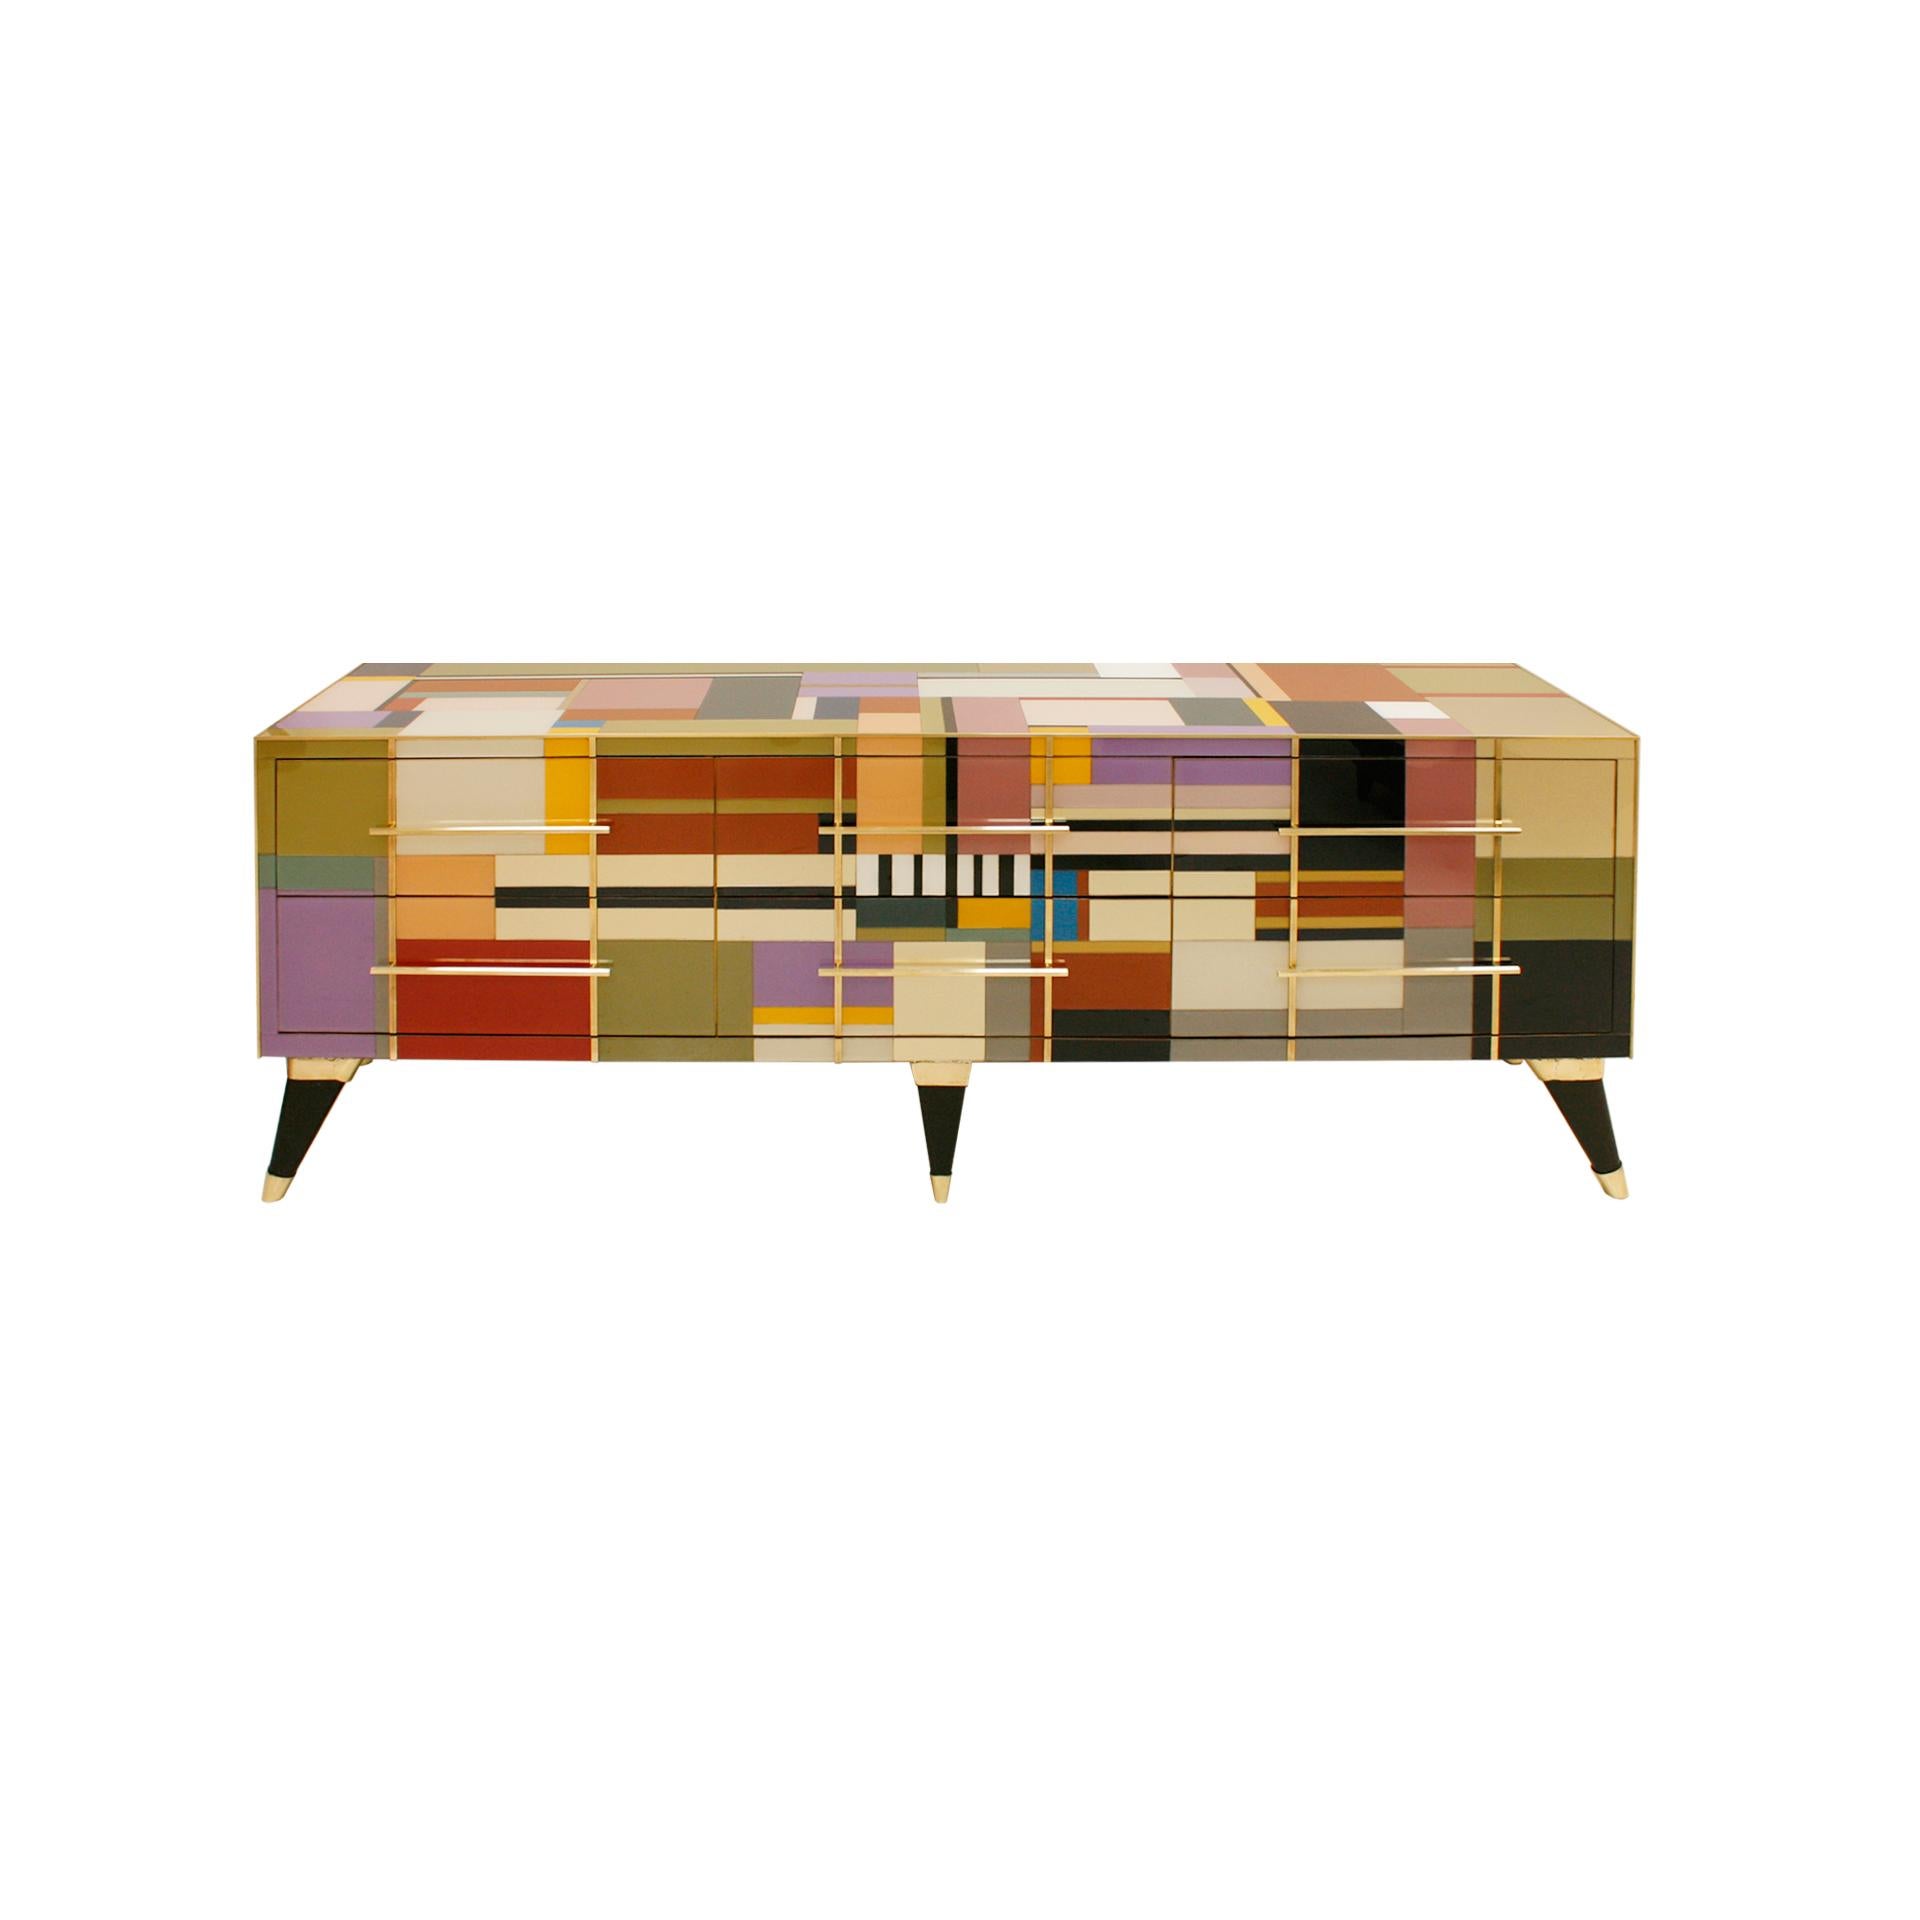 Italian sideboard designed by L.A. Studio. Made of solid wood structure, covered in colored glass. Brass profiles and handles. Composed of six drawers. Made in Italy.

Production can last between 5 and 6 weeks.

Every item LA Studio offers is